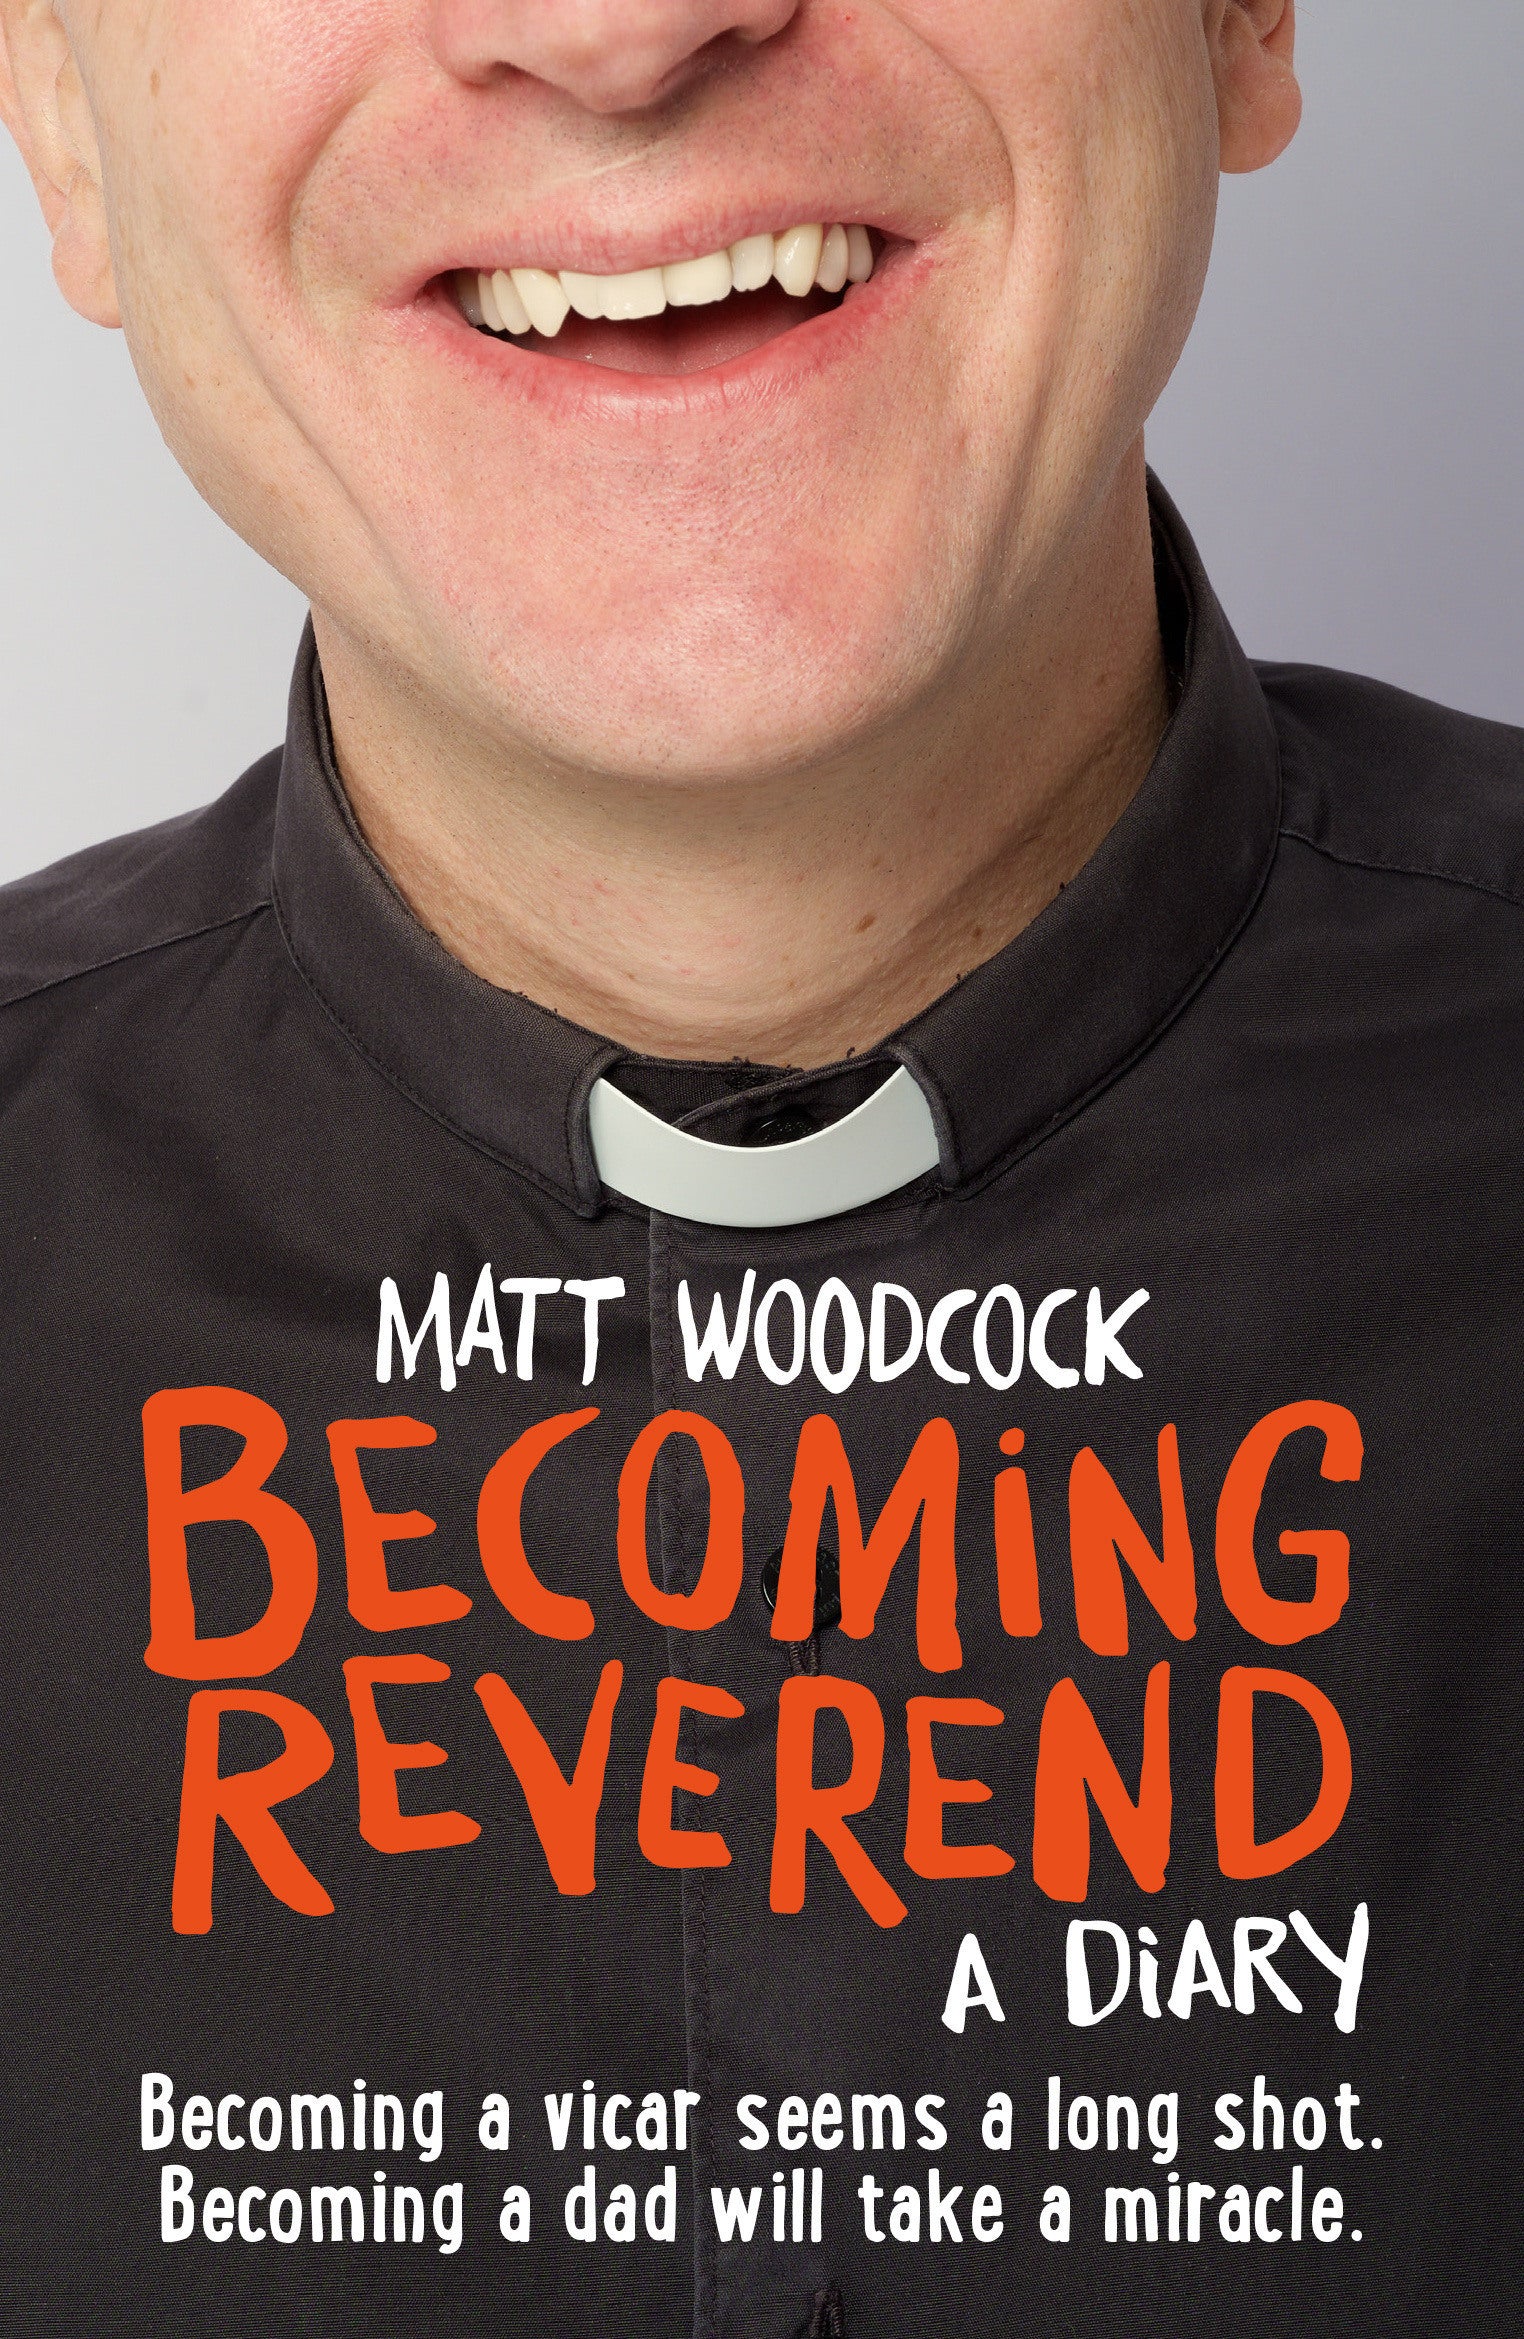 Image of Becoming Reverend other